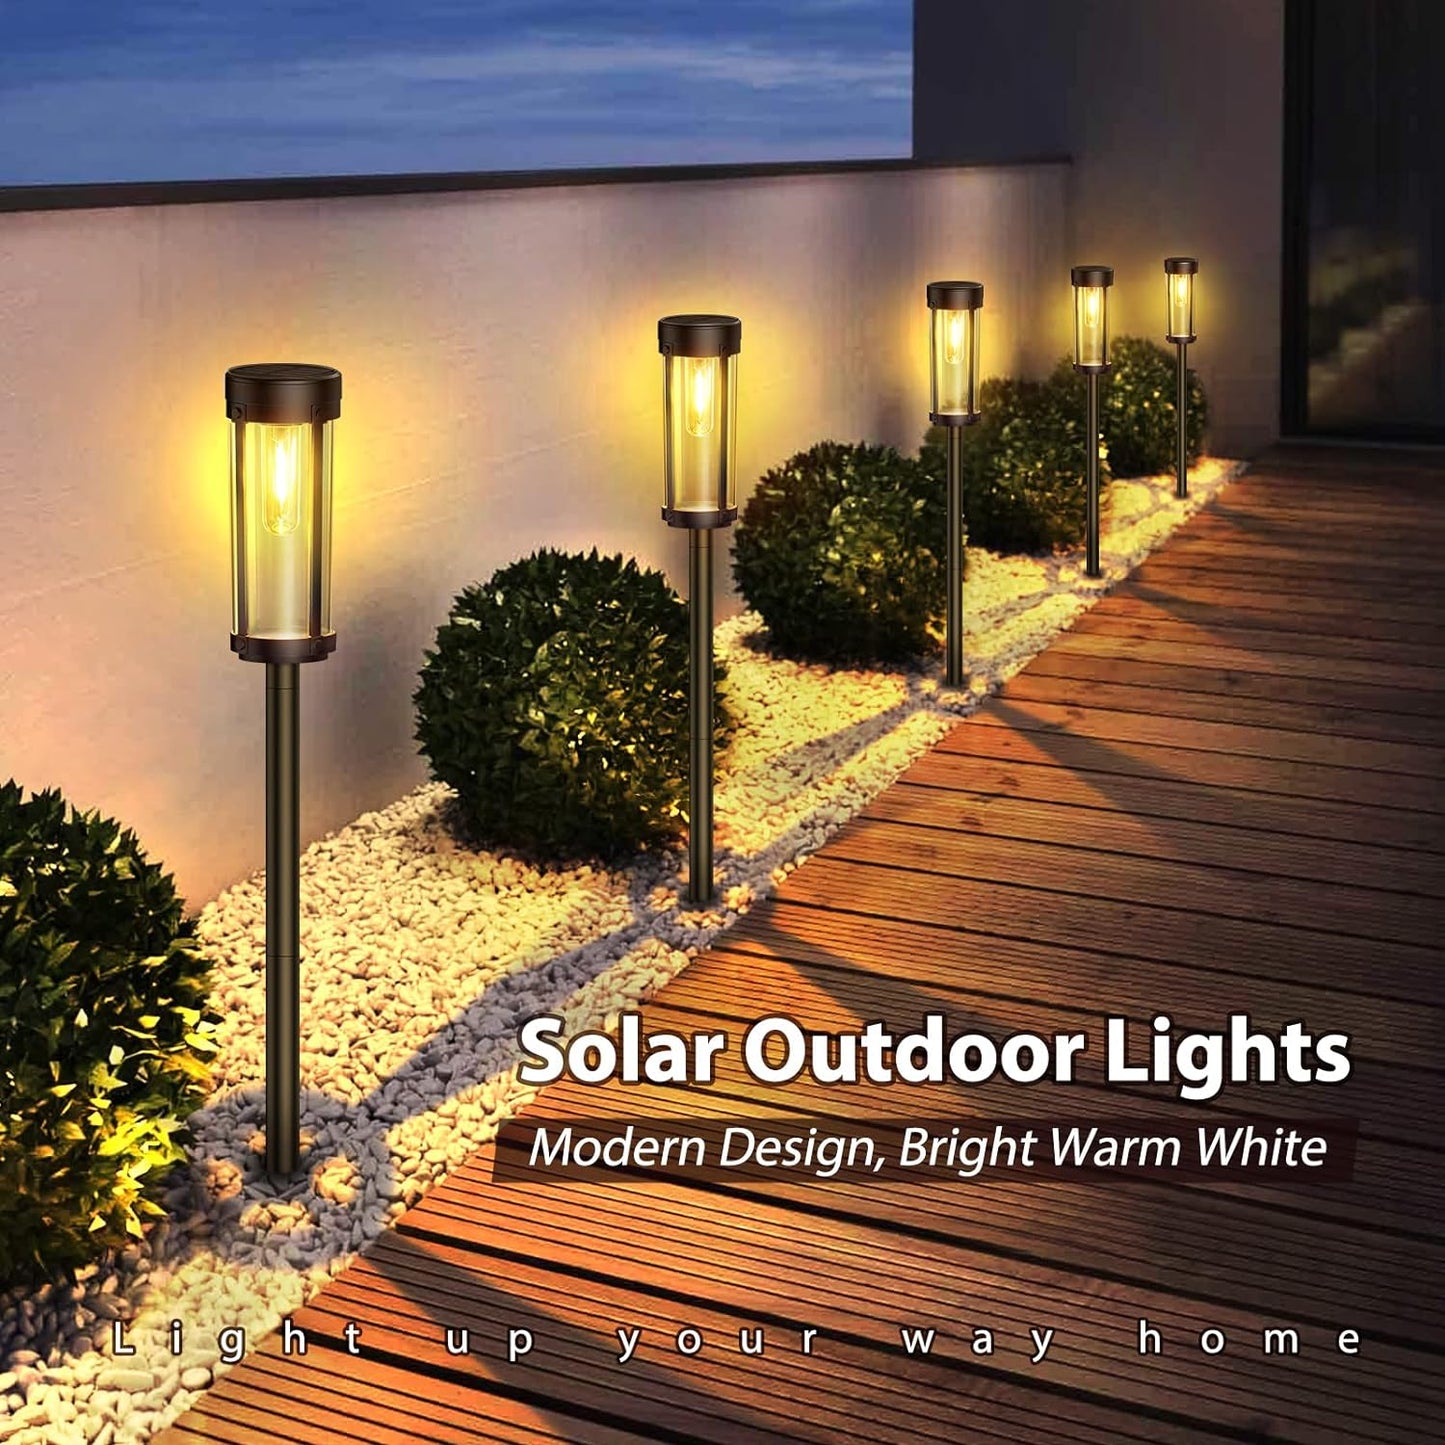 Solar Lawn Pathway Decoration Stake Light - 50% OFF